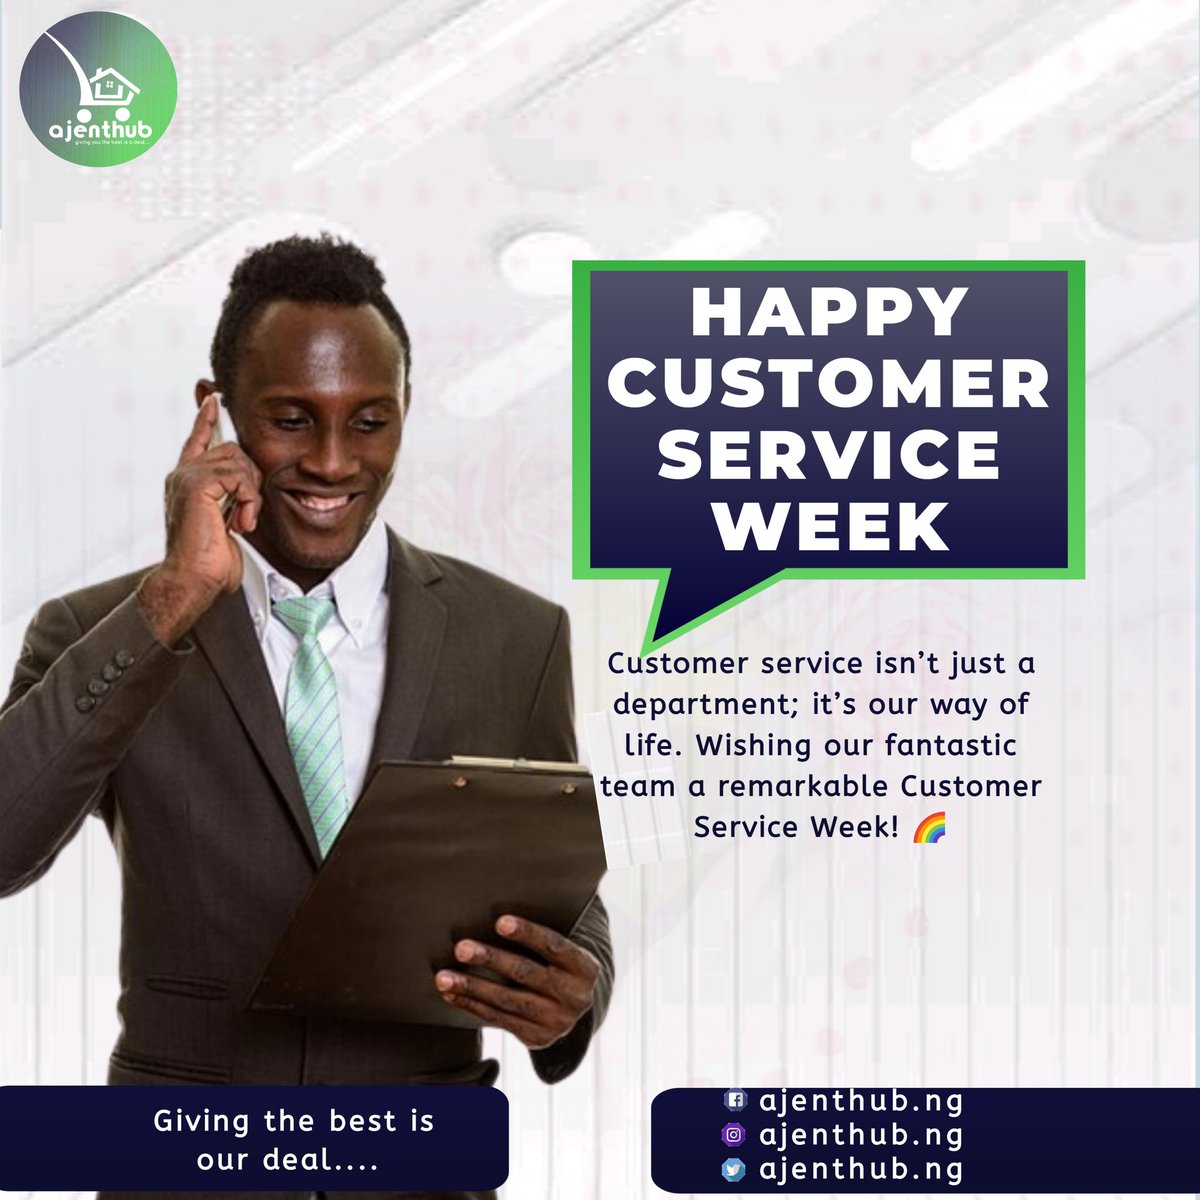 Customer service isn’t just a department; it’s our way of life. Wishing our fantastic team a remarkable Customer Service Week! 🌈 #ServiceWithHeart